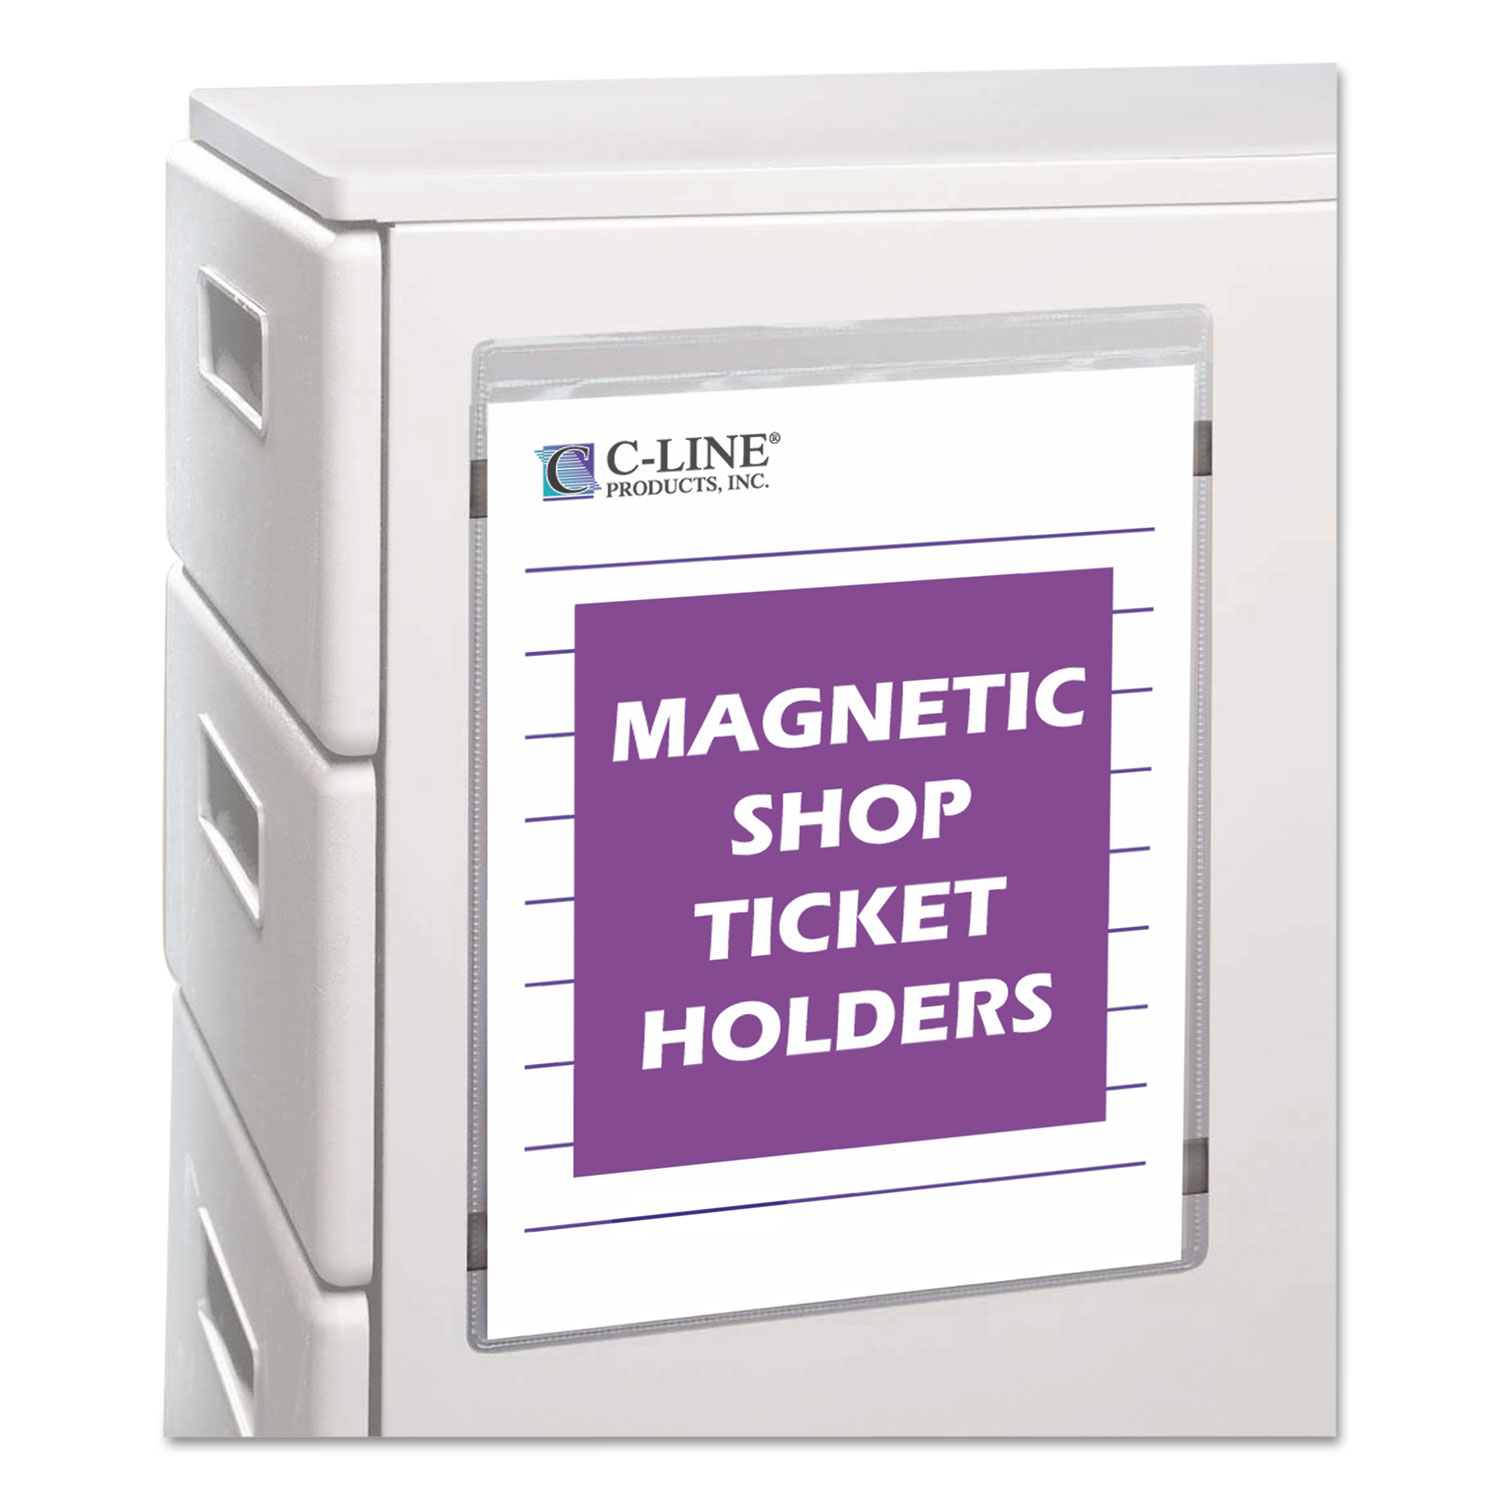  C-Line 83912 Magnetic Shop Ticket Holders, Super Heavyweight, 50 Sheets, 9 x 12, 15/BX (CLI83912) 